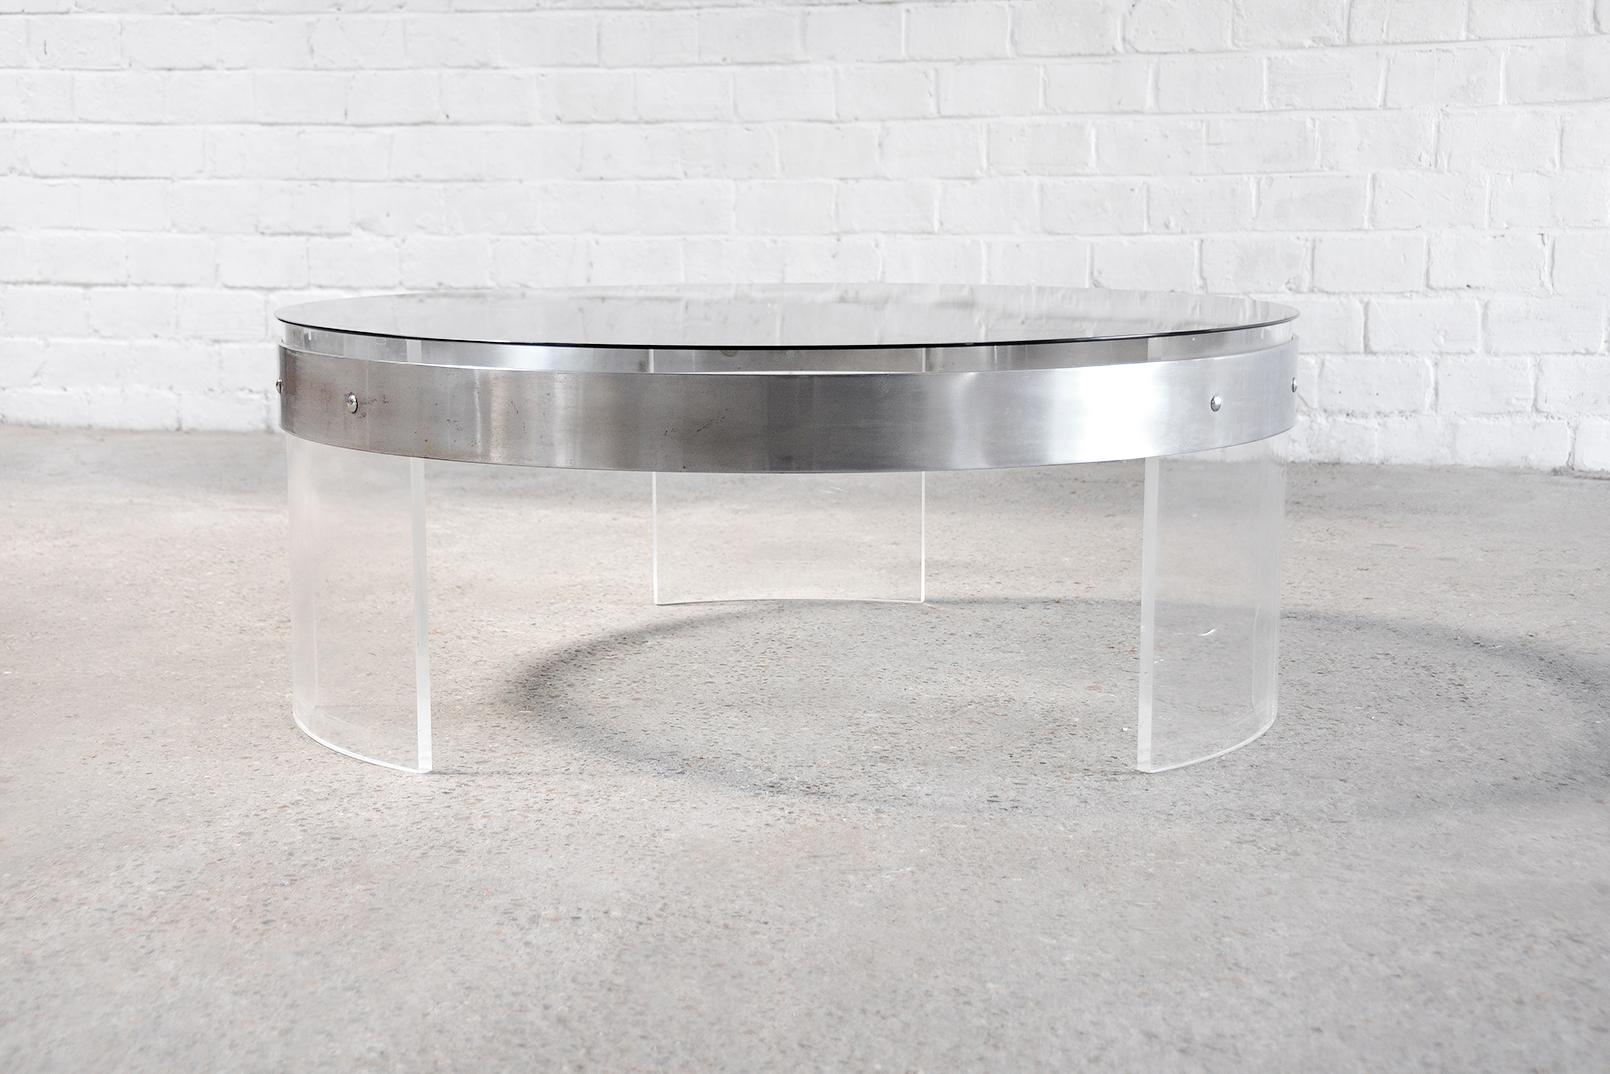 Vintage Acrylic & Steel Glass Coffee Table, France 1970s For Sale 1